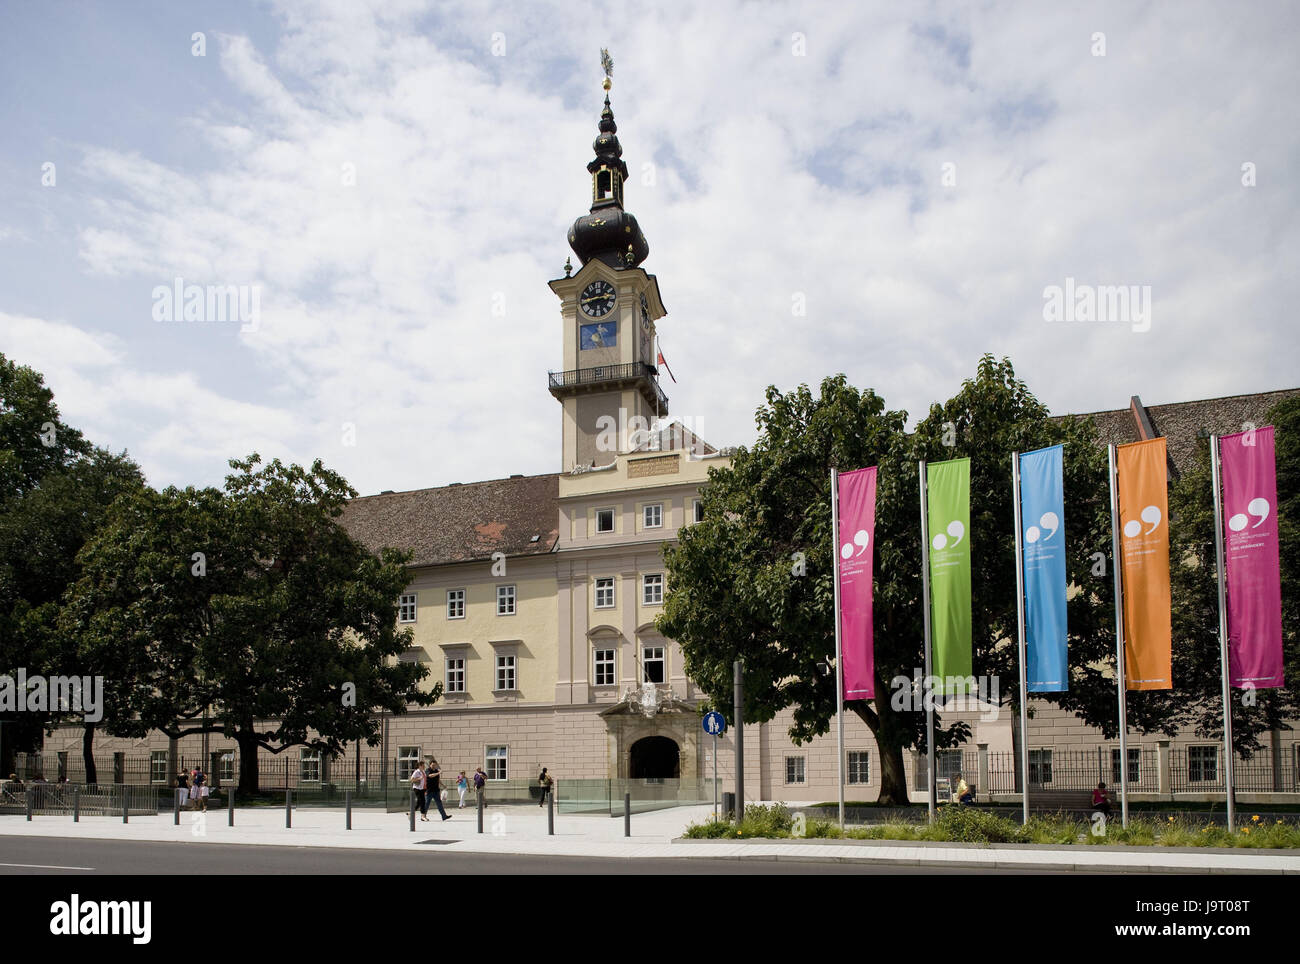 Austria,Upper Austria,Linz,country house,promenade,state capital,cultural capital,industrial town,architecture,structure,facade,house facade,building,art,culture,place of interest,destination,clouds,people,tourists,tower,flags,brightly,trees,Renaissance construction, Stock Photo